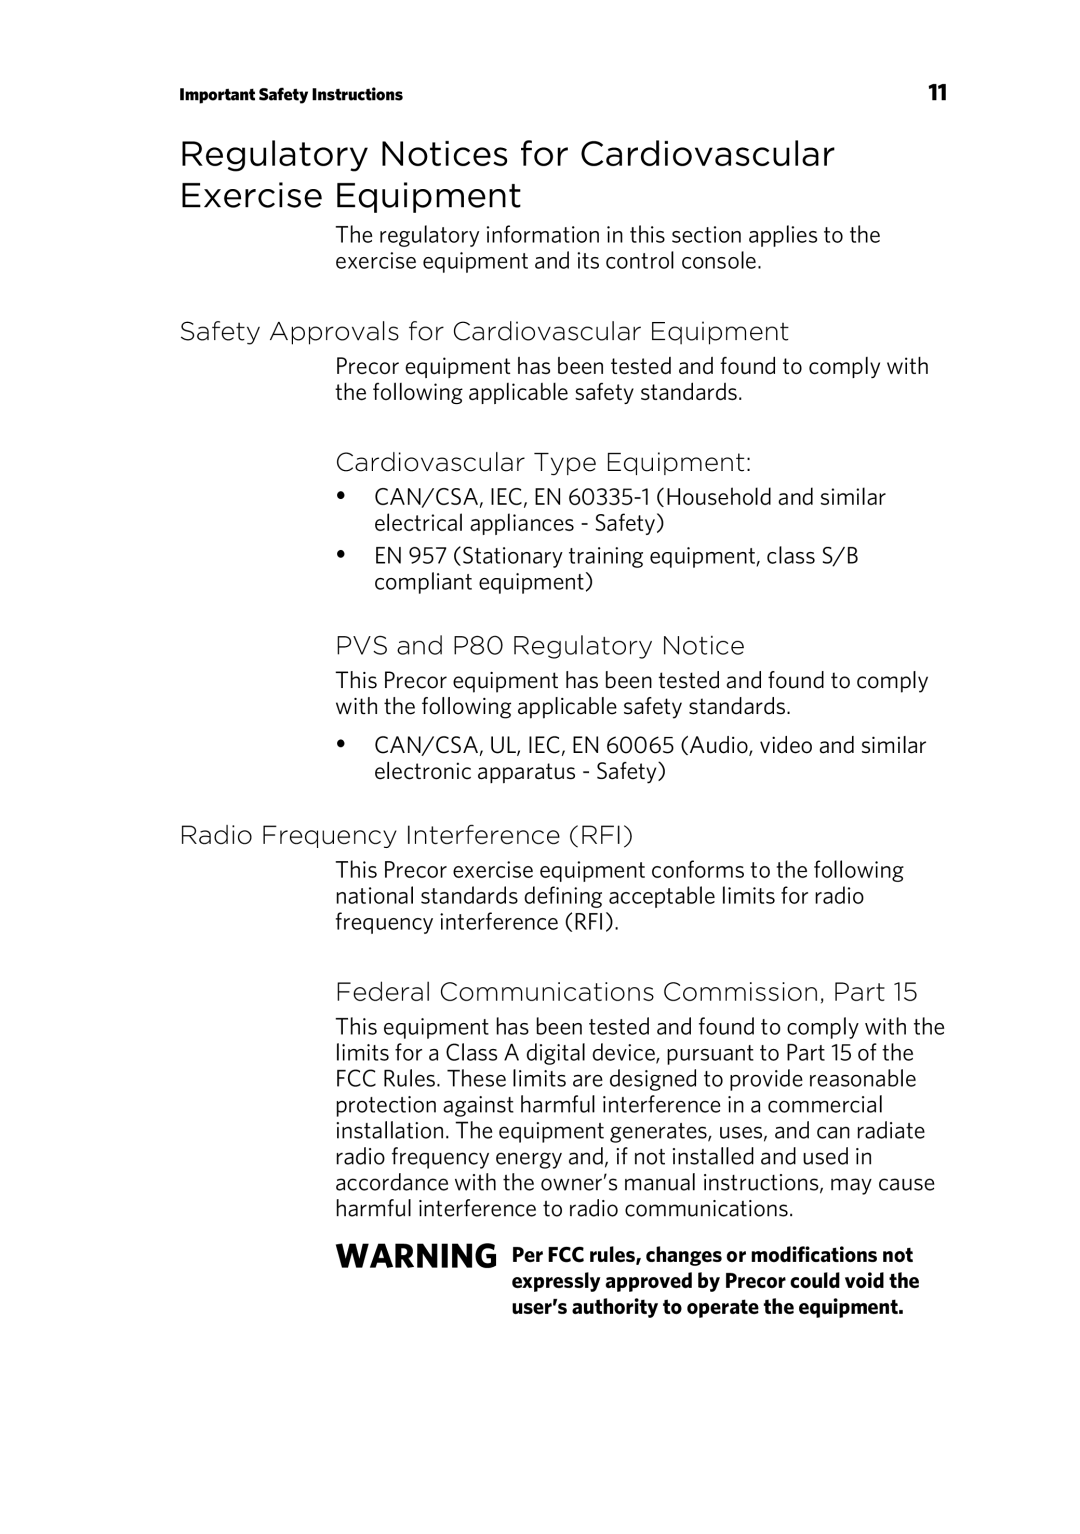 Precor Safety Approvals for Cardiovascular Equipment, Cardiovascular Type Equipment, PVS and P80 Regulatory Notice 